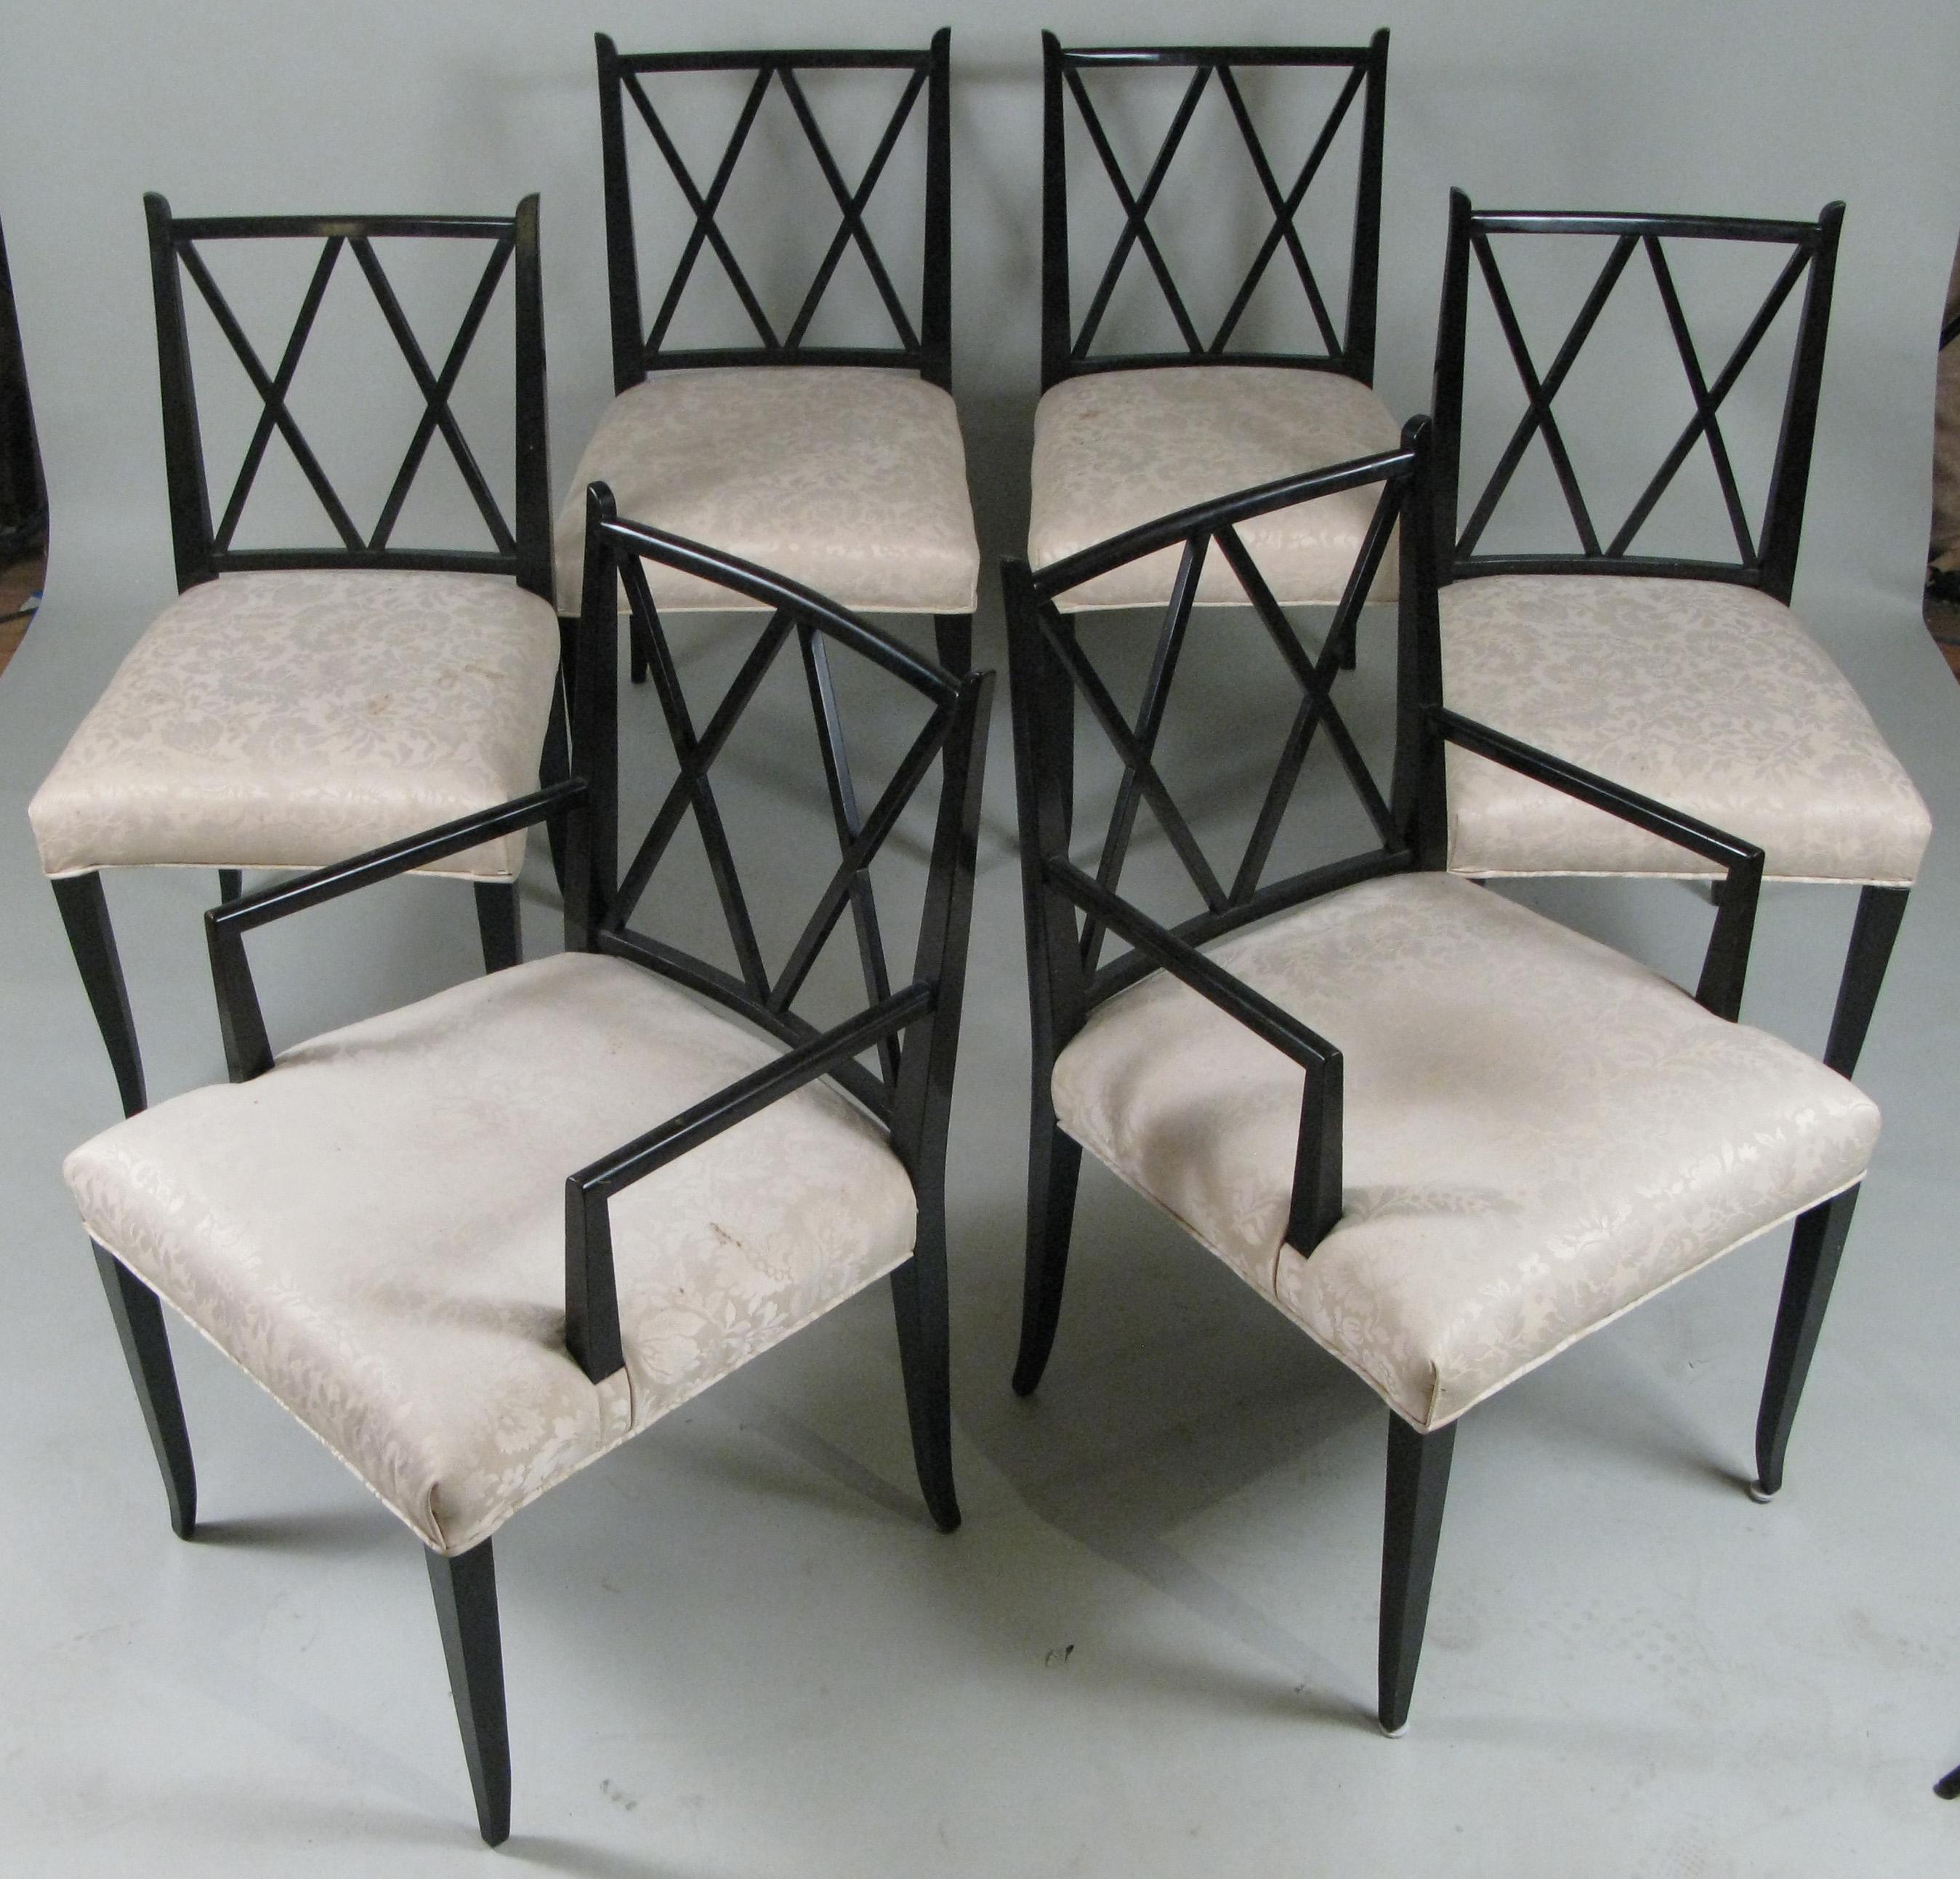 An elegant and Classic set of six ebonized mahogany dining chairs designed by Tommi Parzinger for Parzinger originals, circa 1950. Beautiful and graceful design with a double X in the back, and wide and comfortable seats. The set is comprised of a